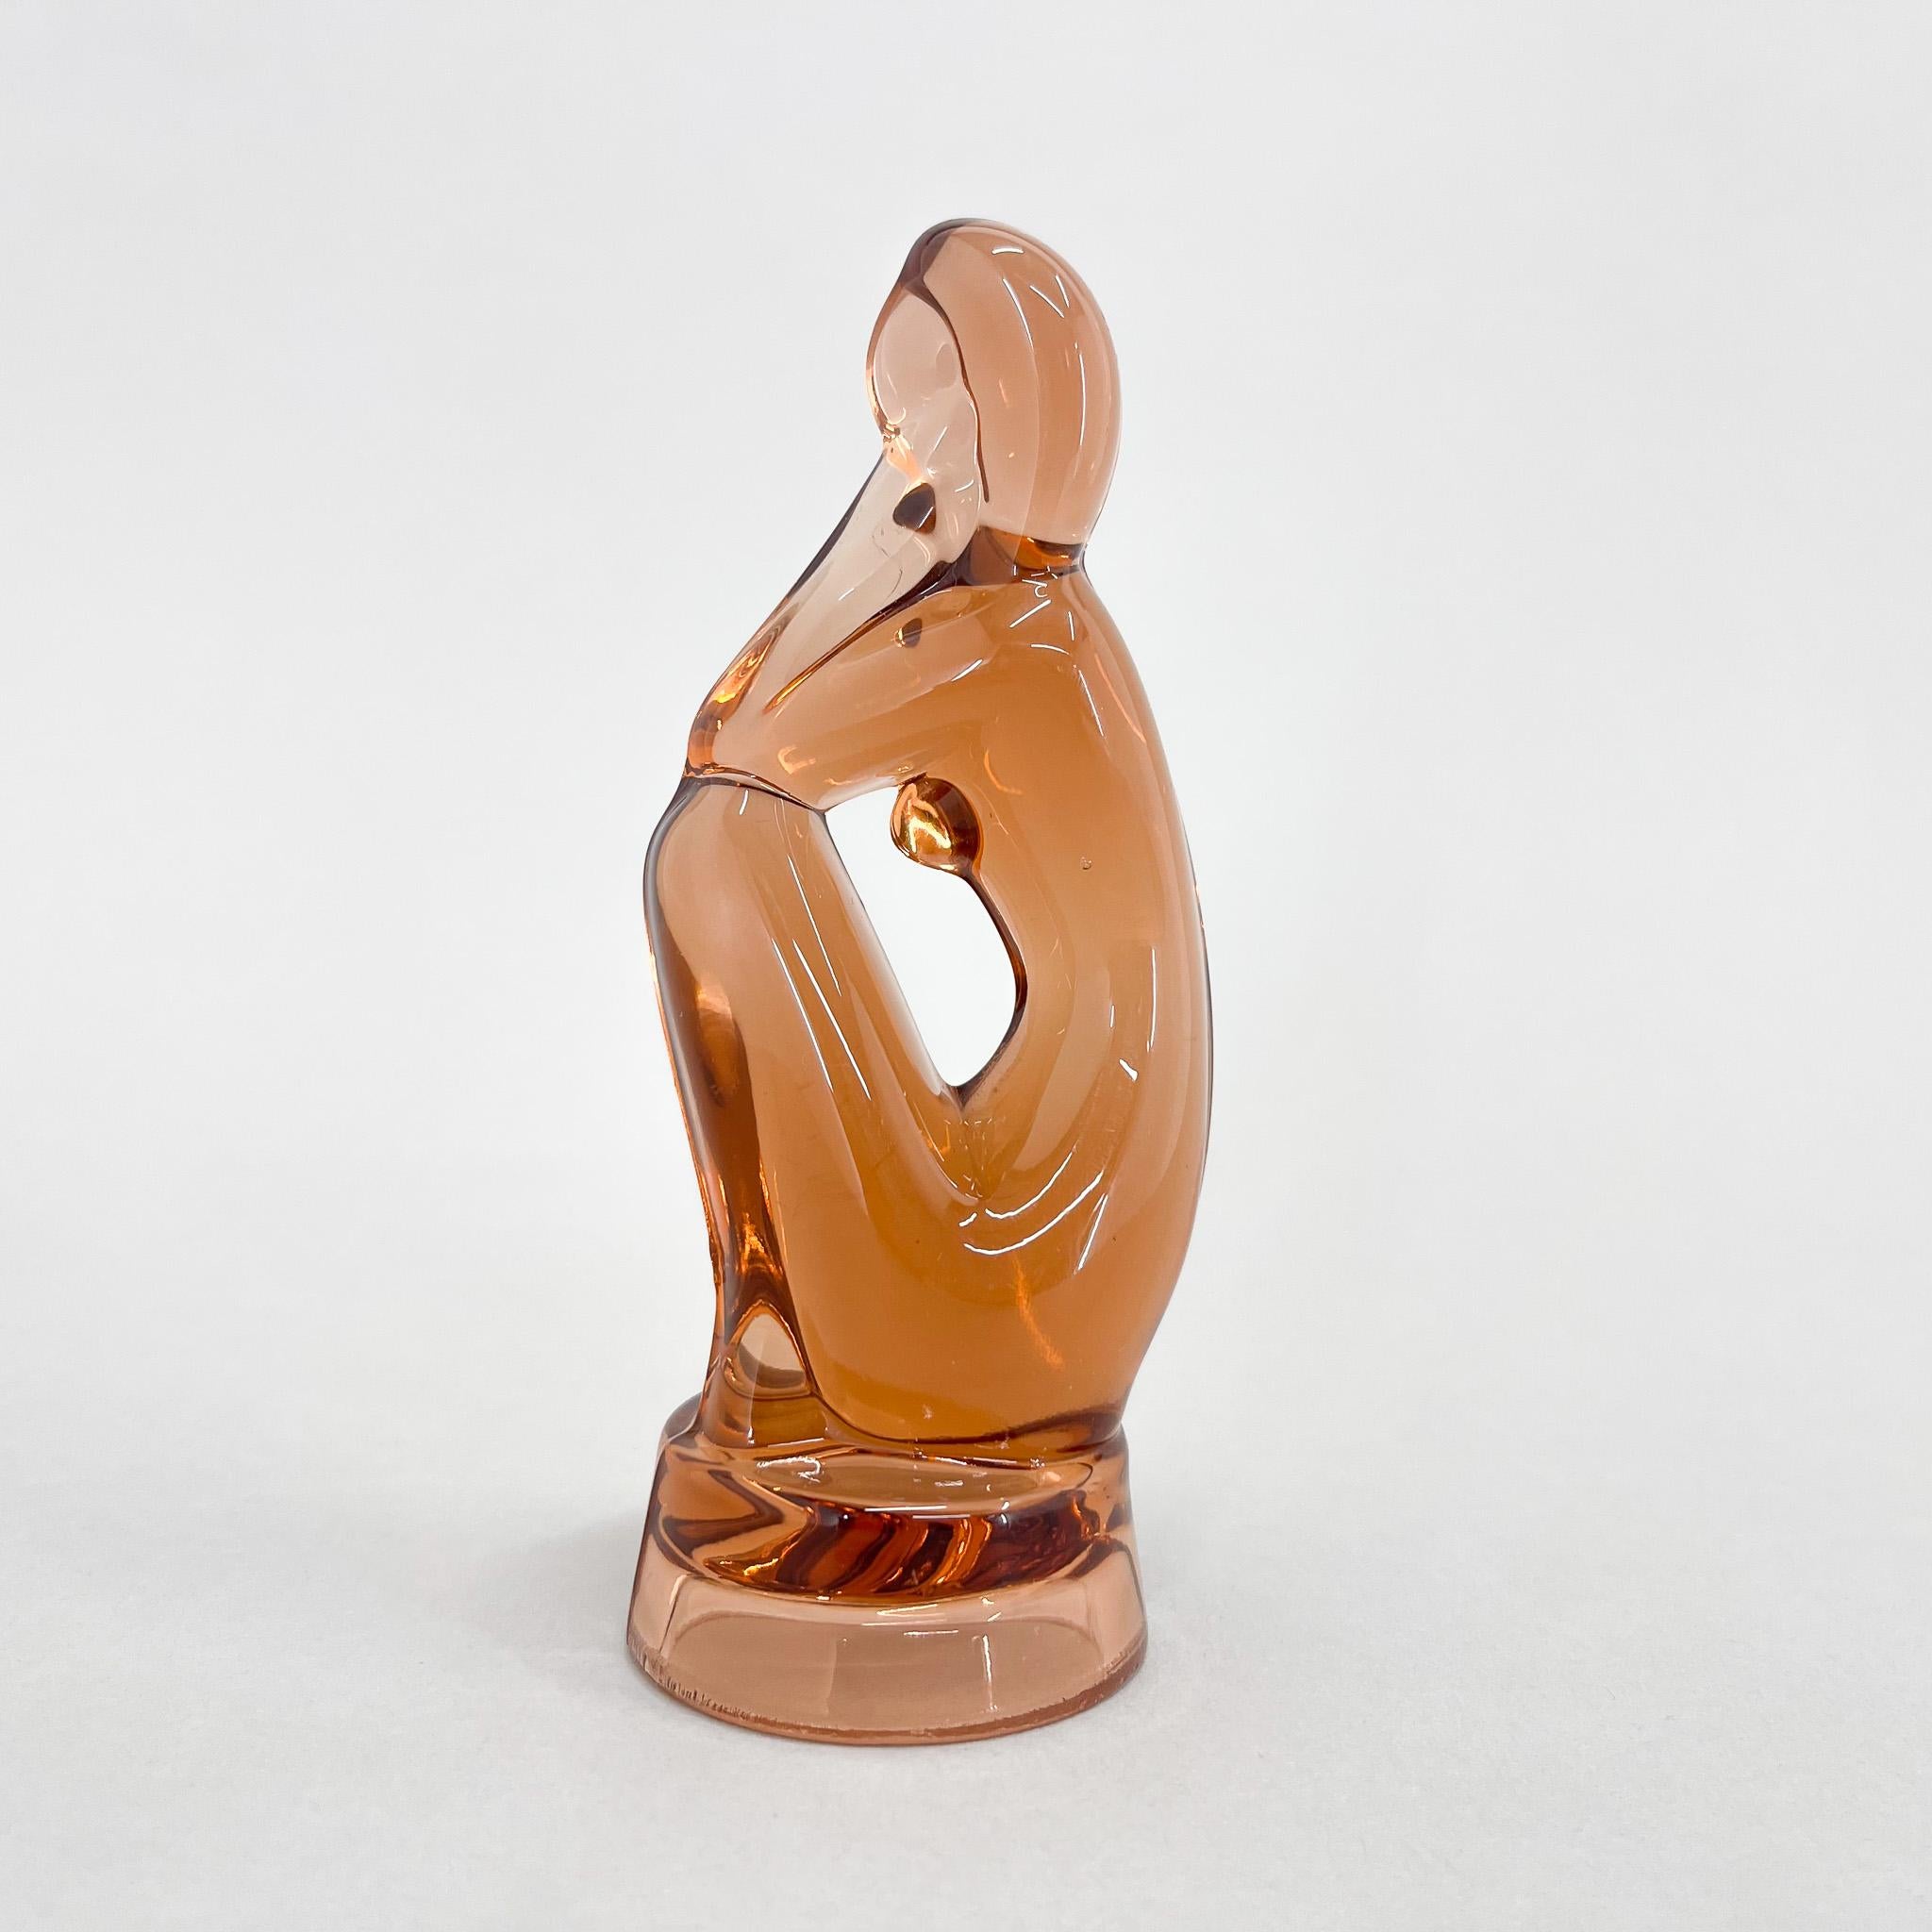 Mid-century glass sculpture by ceramicist, sculptor and glass artist Jitka FOREJTOVÁ. Manufactured by Rudolfova Hut Glassworks (part of Sklo Union) before 1958. 